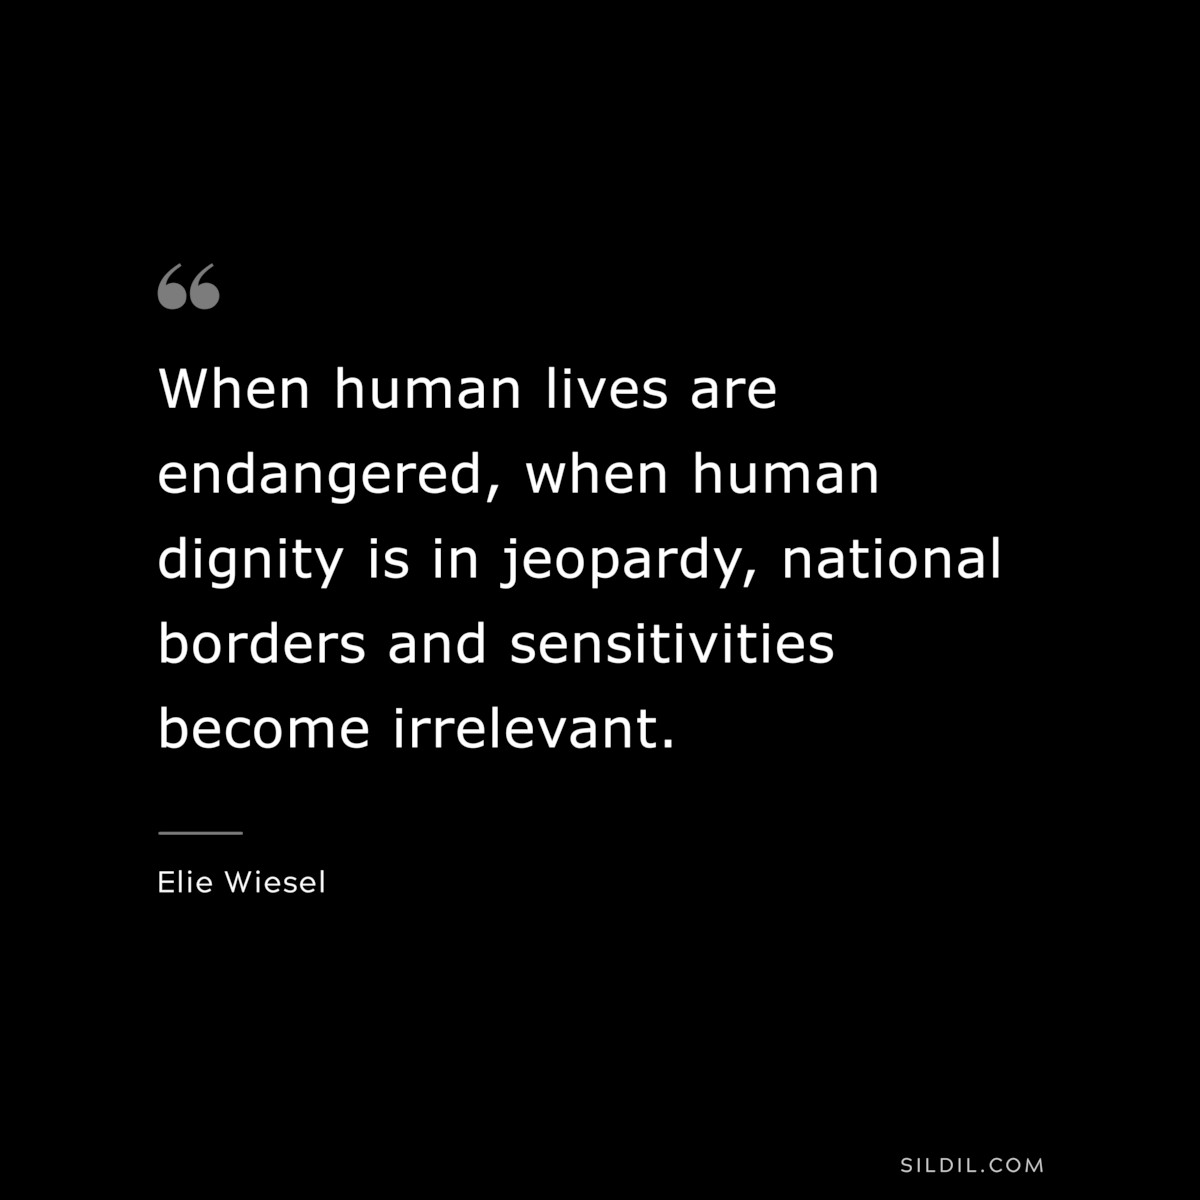 When human lives are endangered, when human dignity is in jeopardy, national borders and sensitivities become irrelevant. ― Elie Wiesel